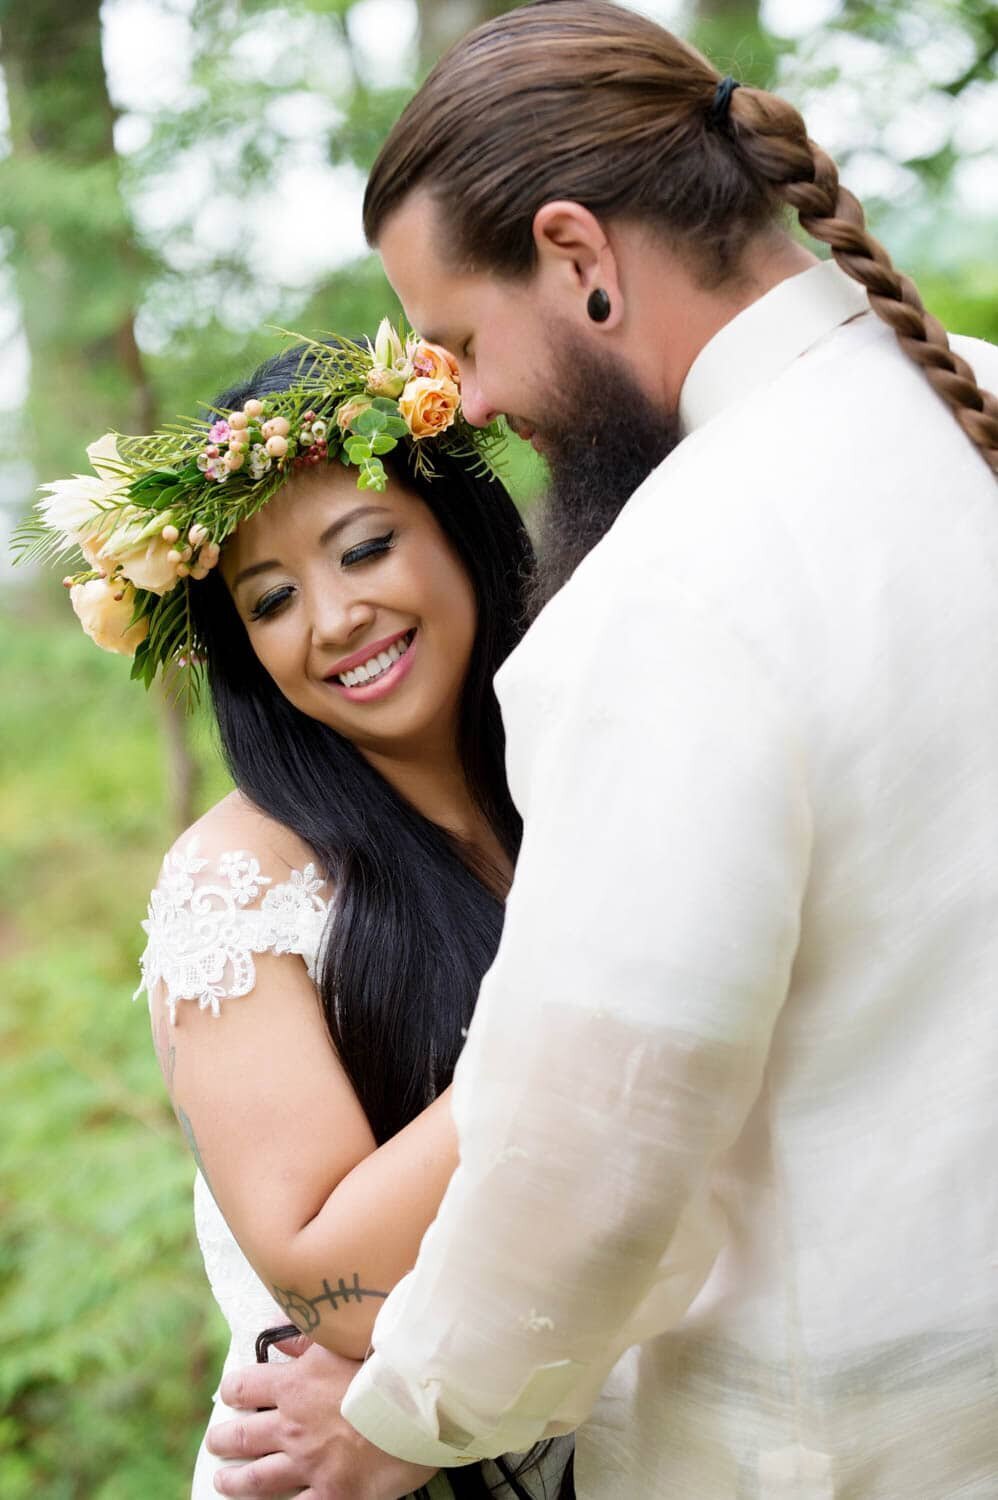 a man with a long braid hugs a bride wearing a colorful floral crown